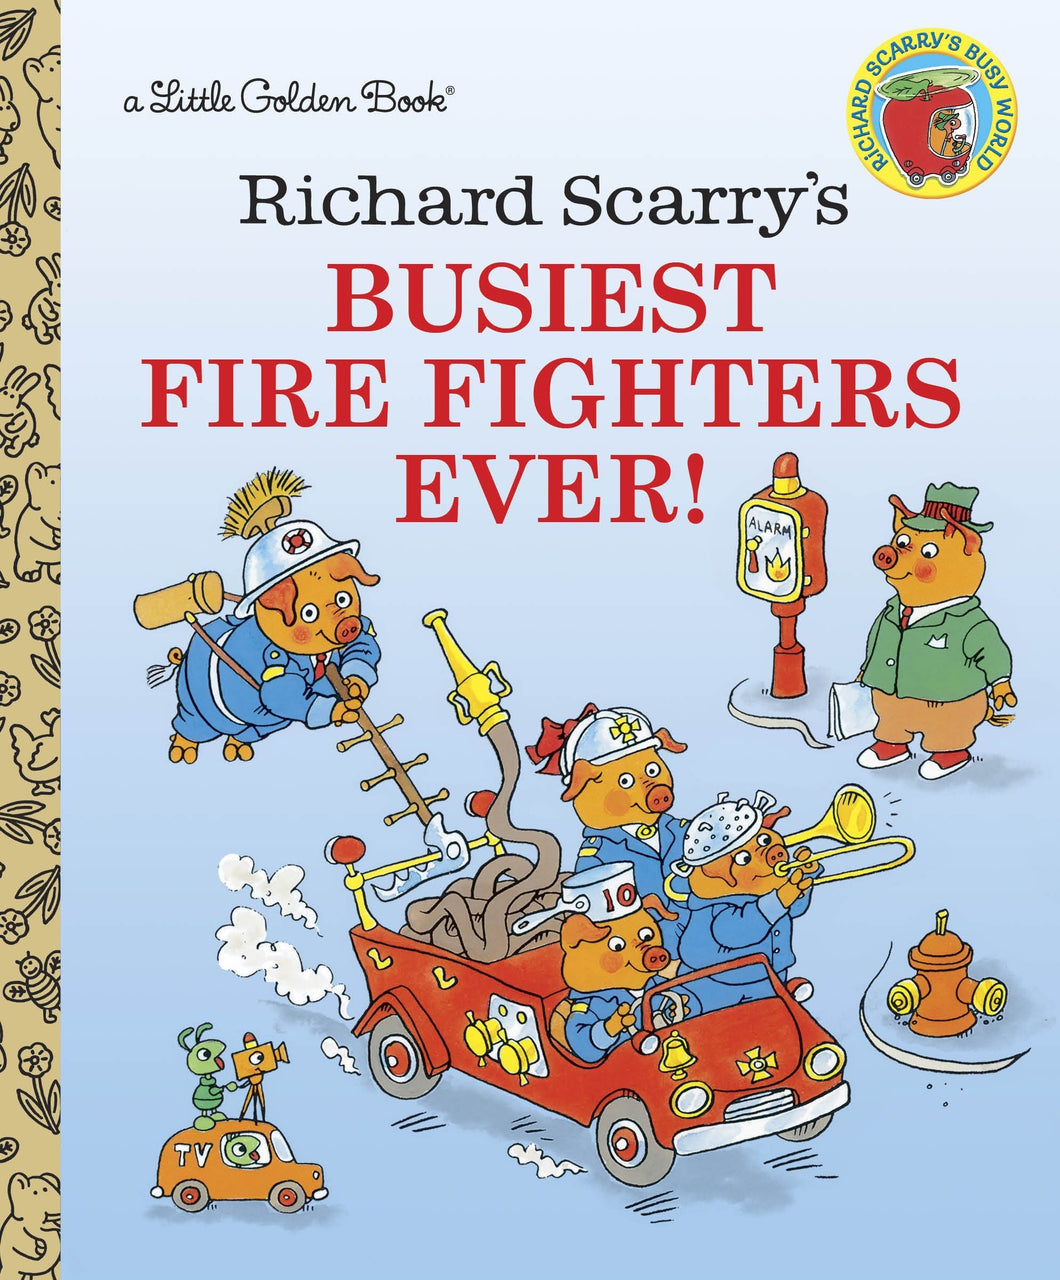 Richard Scarry's Busiest Firefighters Ever Little Golden Book